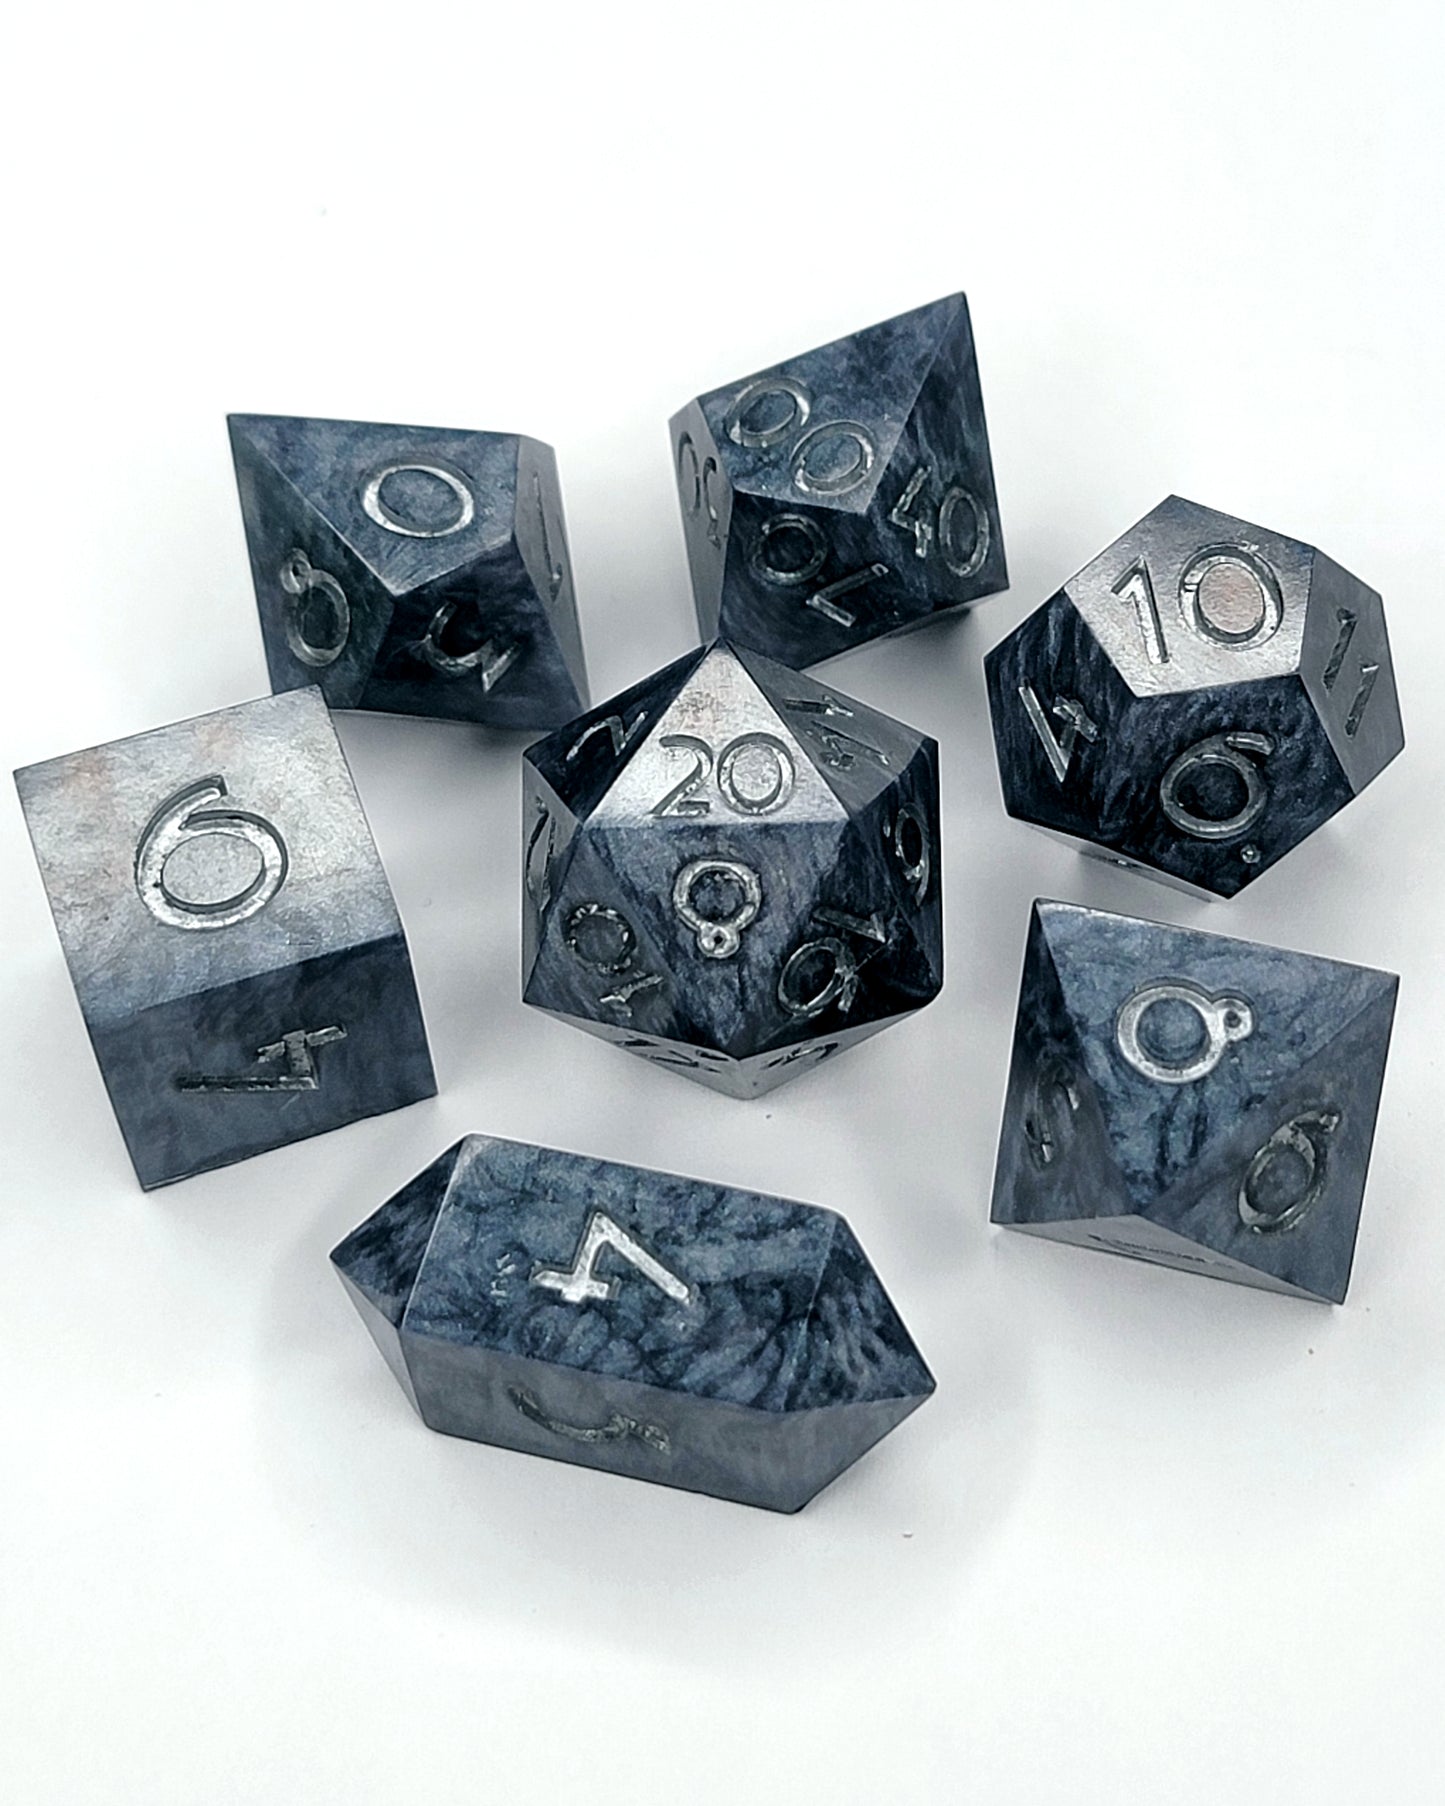 Beskar - 7 Piece handmade D&D Dice| Hand Crafted Dungeons and Dragons Dice